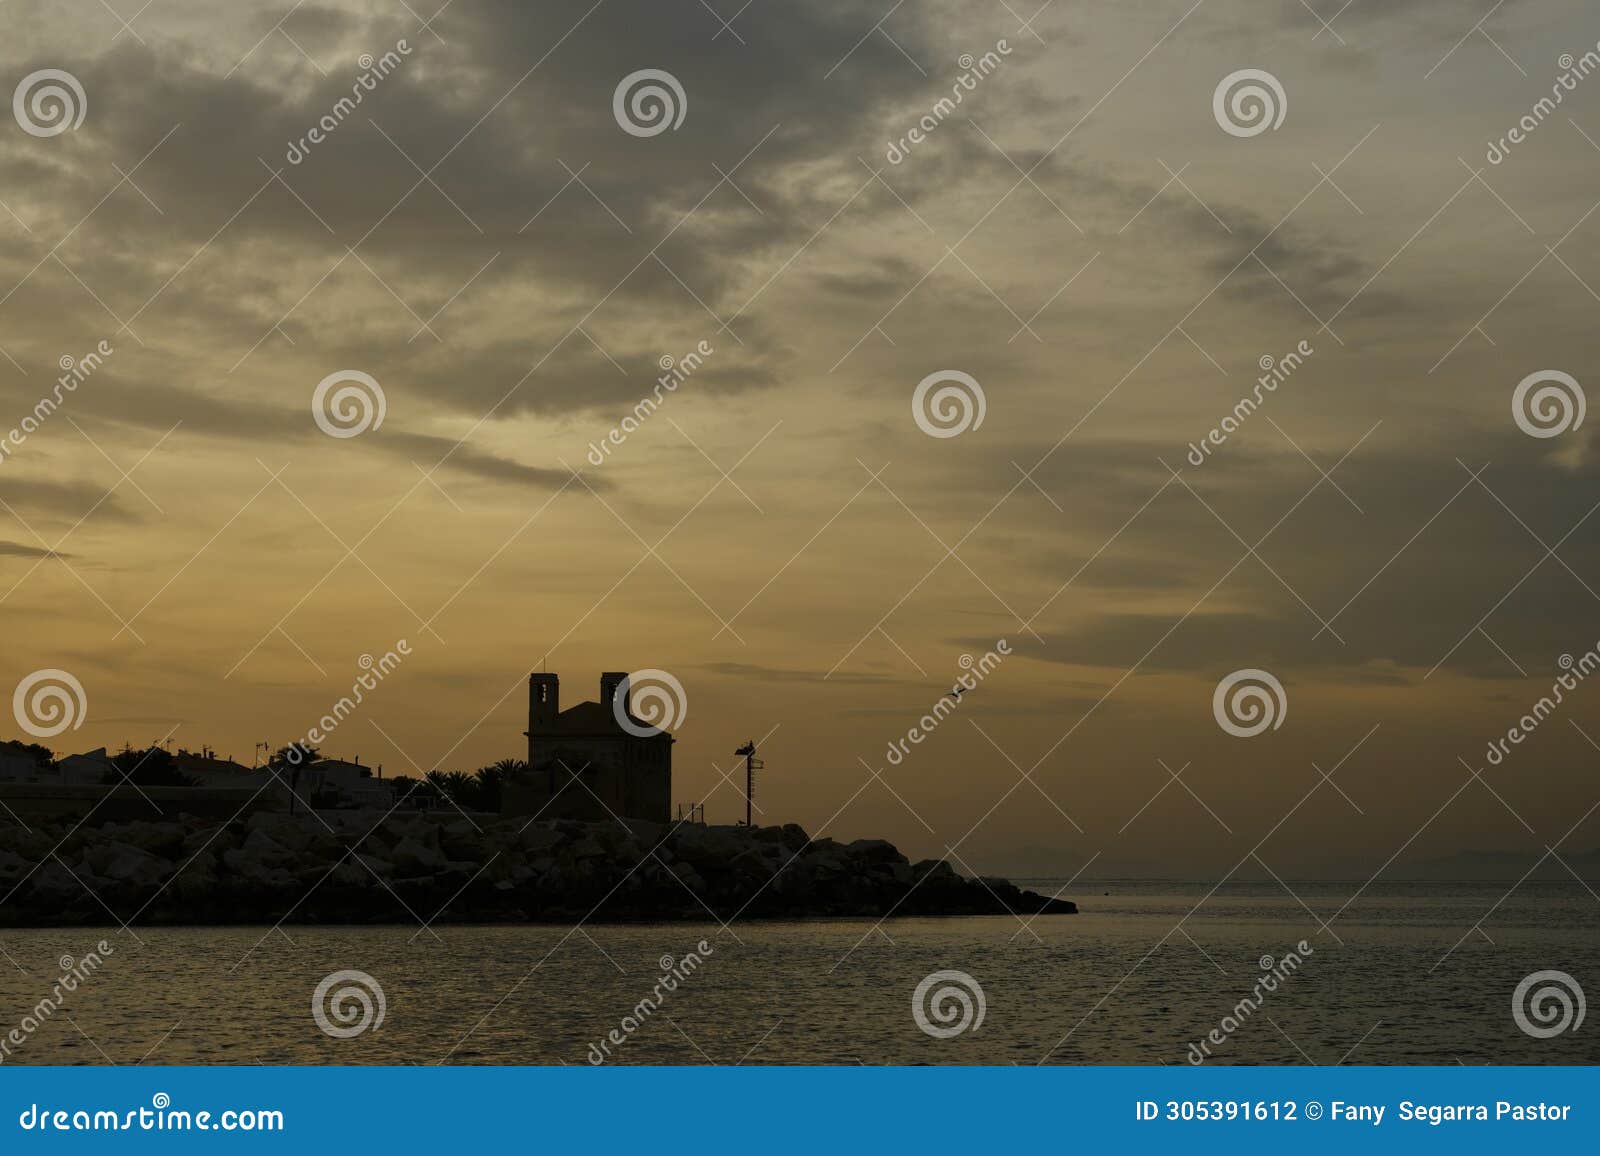 the sunset on the island of tabarca, on a winter sunset